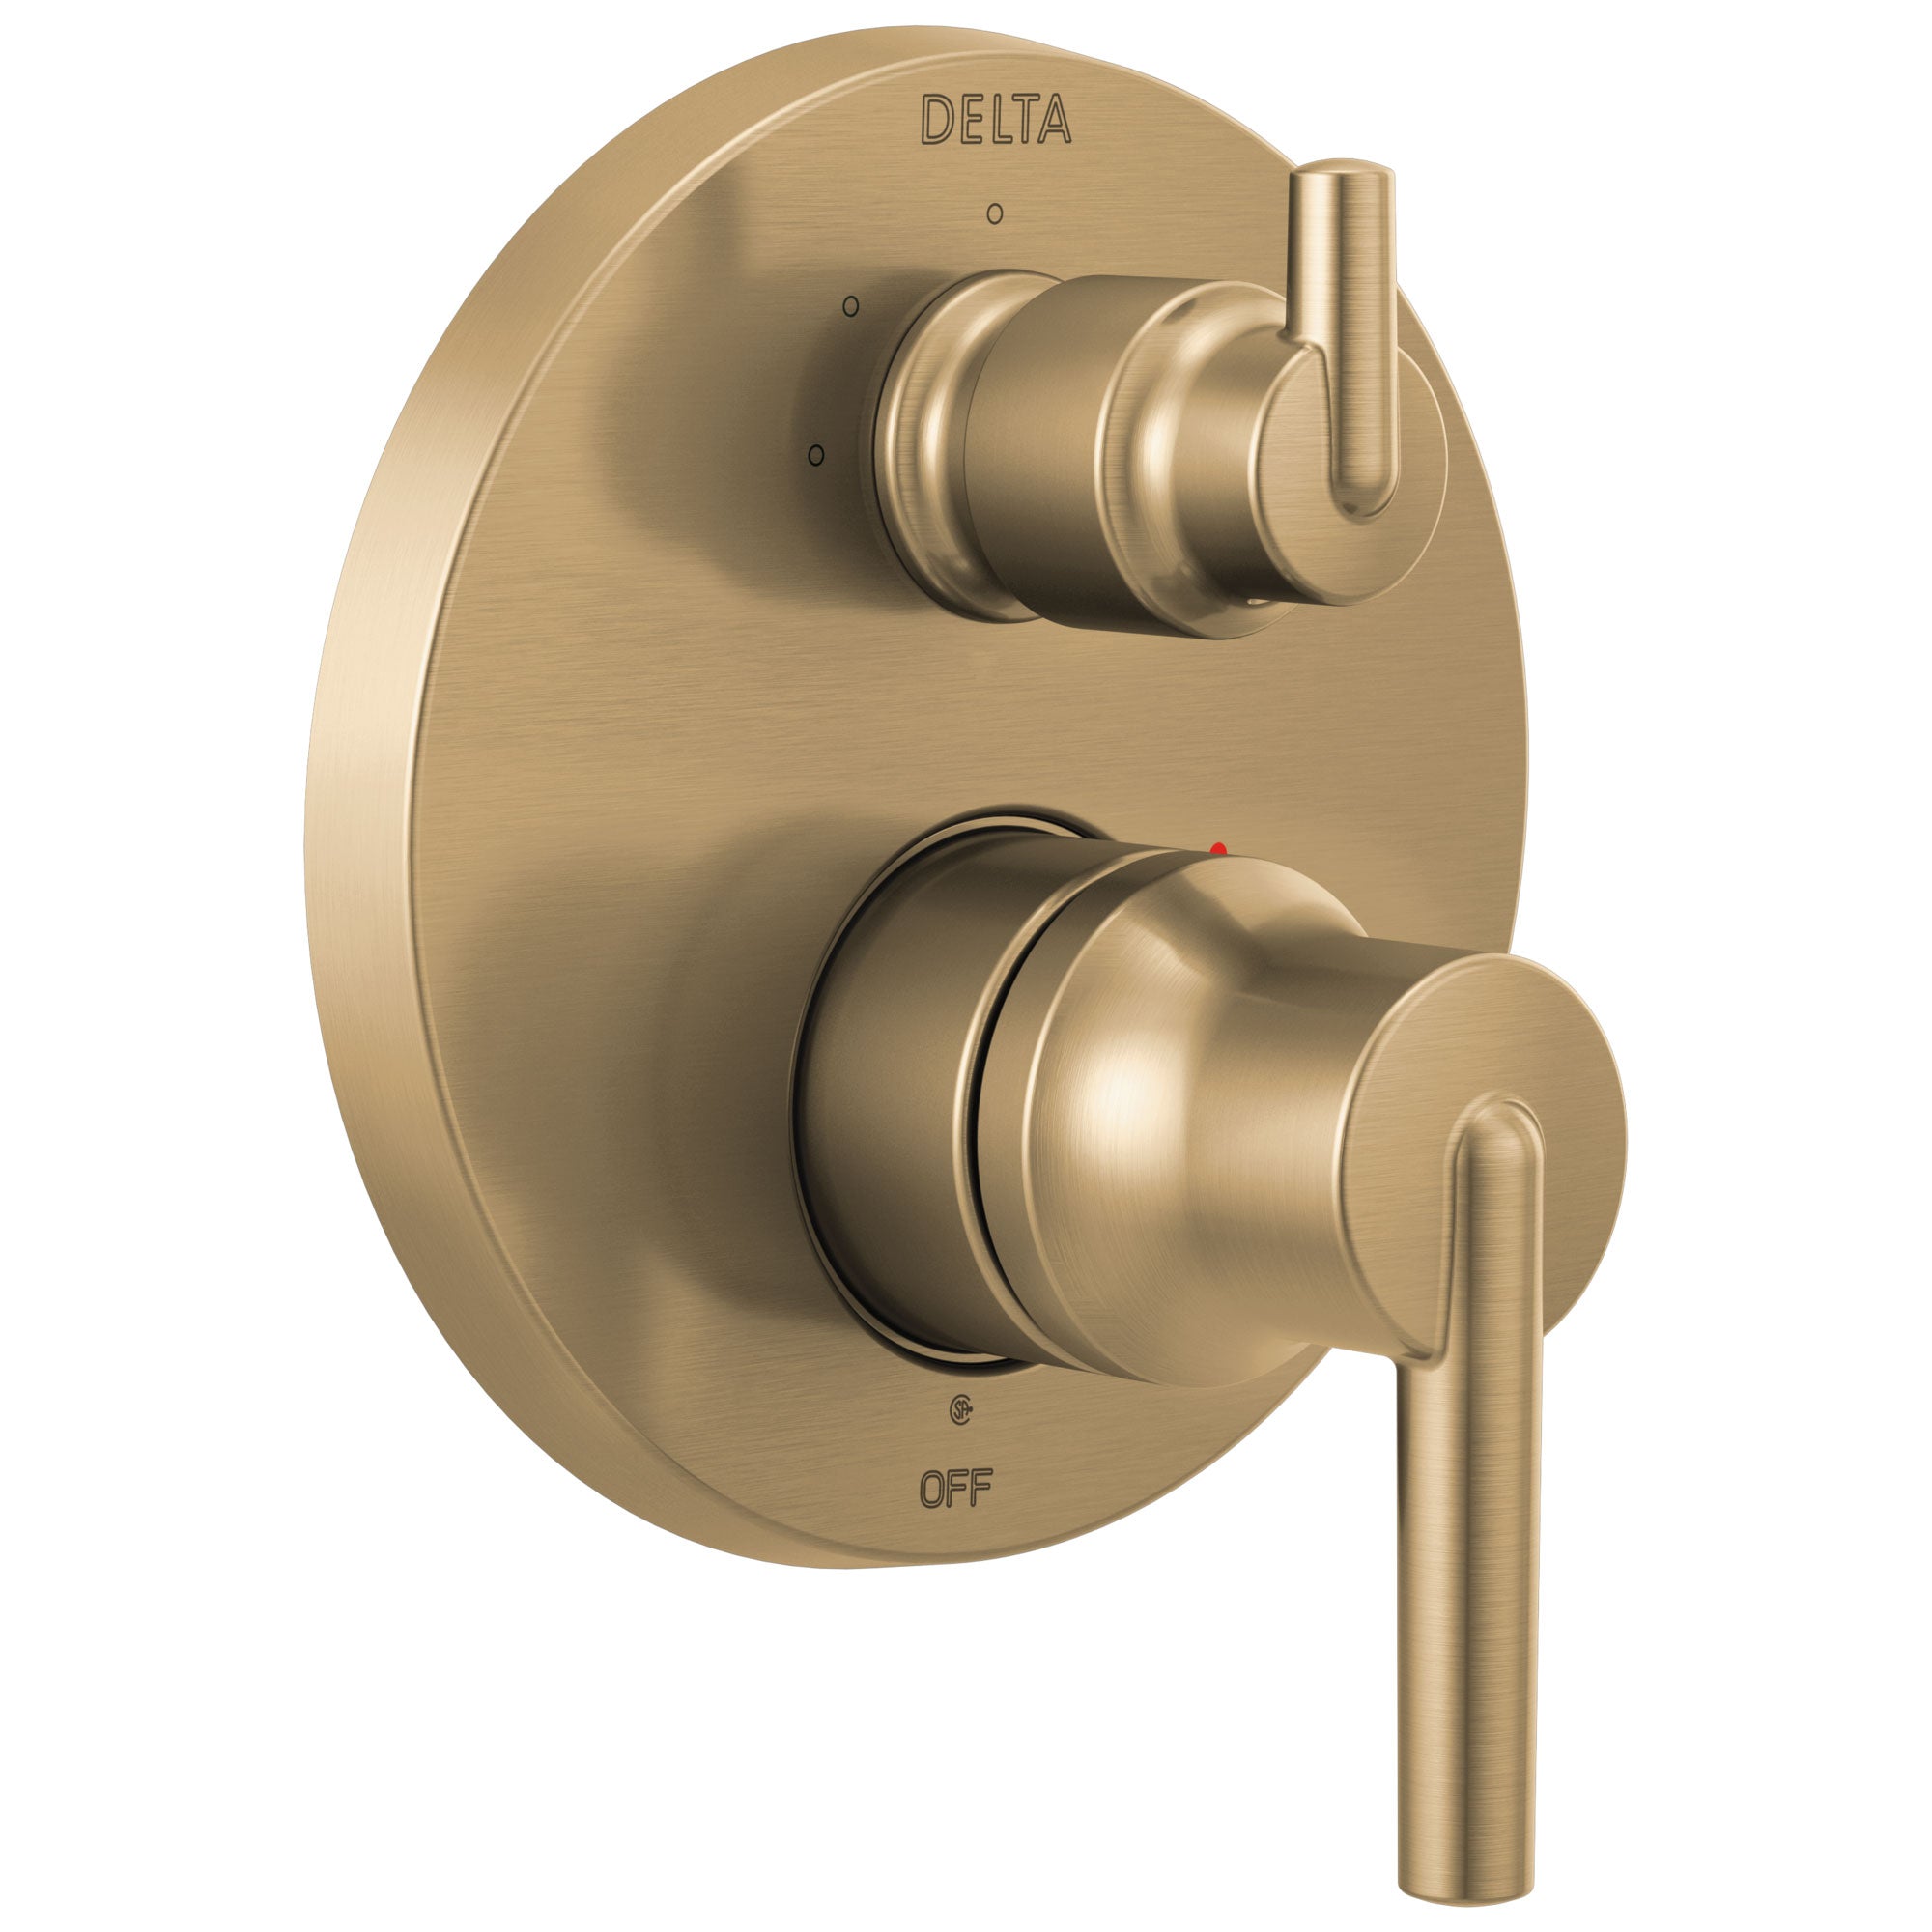 Delta Trinsic Champagne Bronze Finish Monitor 14 Series Shower System Control with 3-Setting Integrated Diverter Includes Valve and Handles D3778V